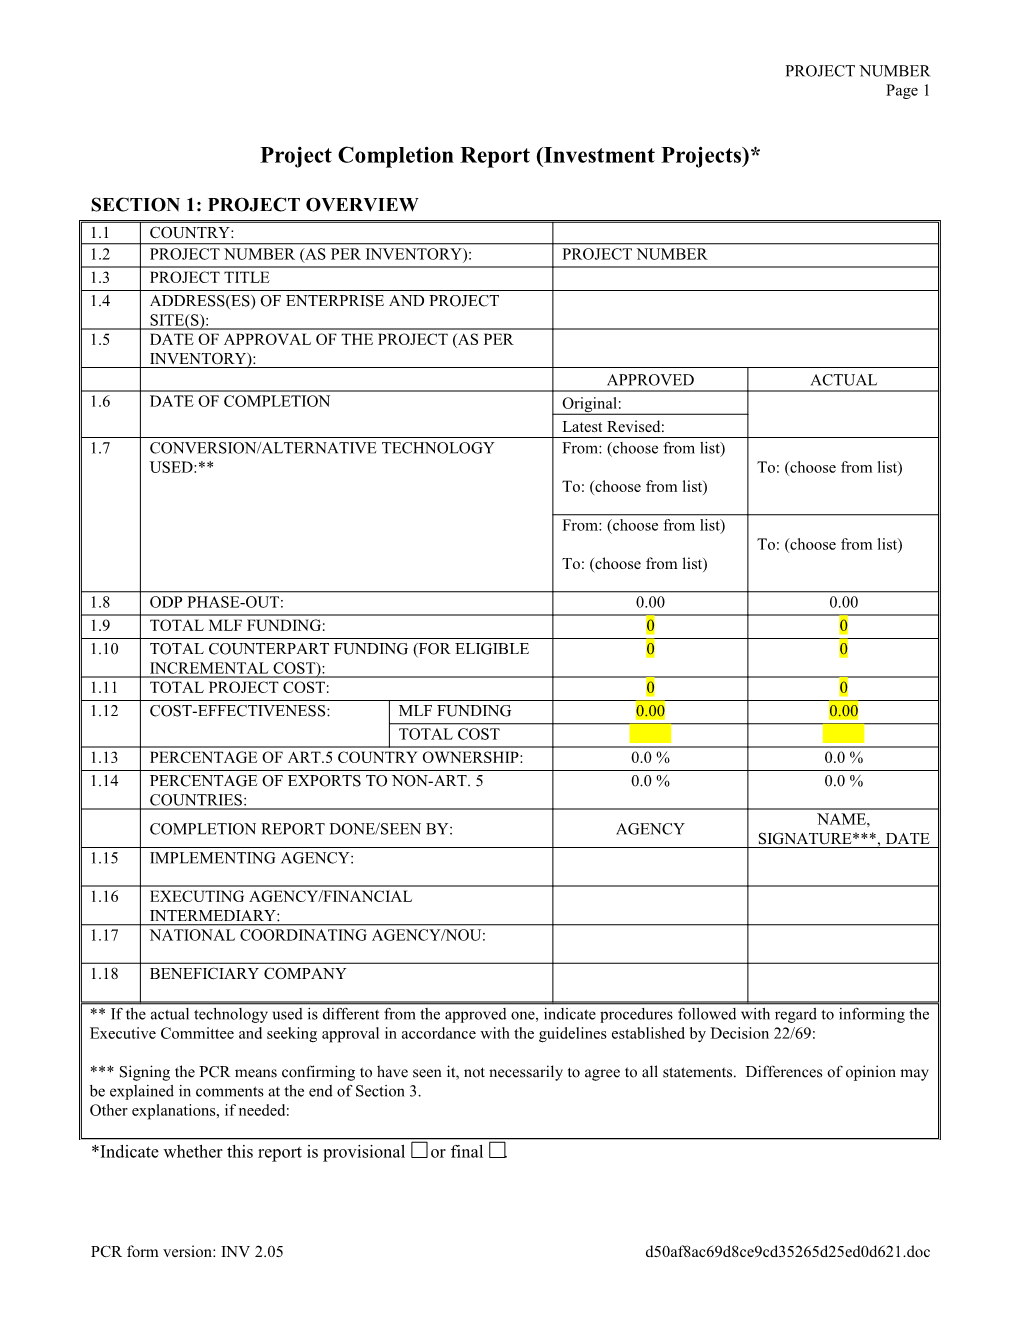 Project Completion Report (Investment Projects)